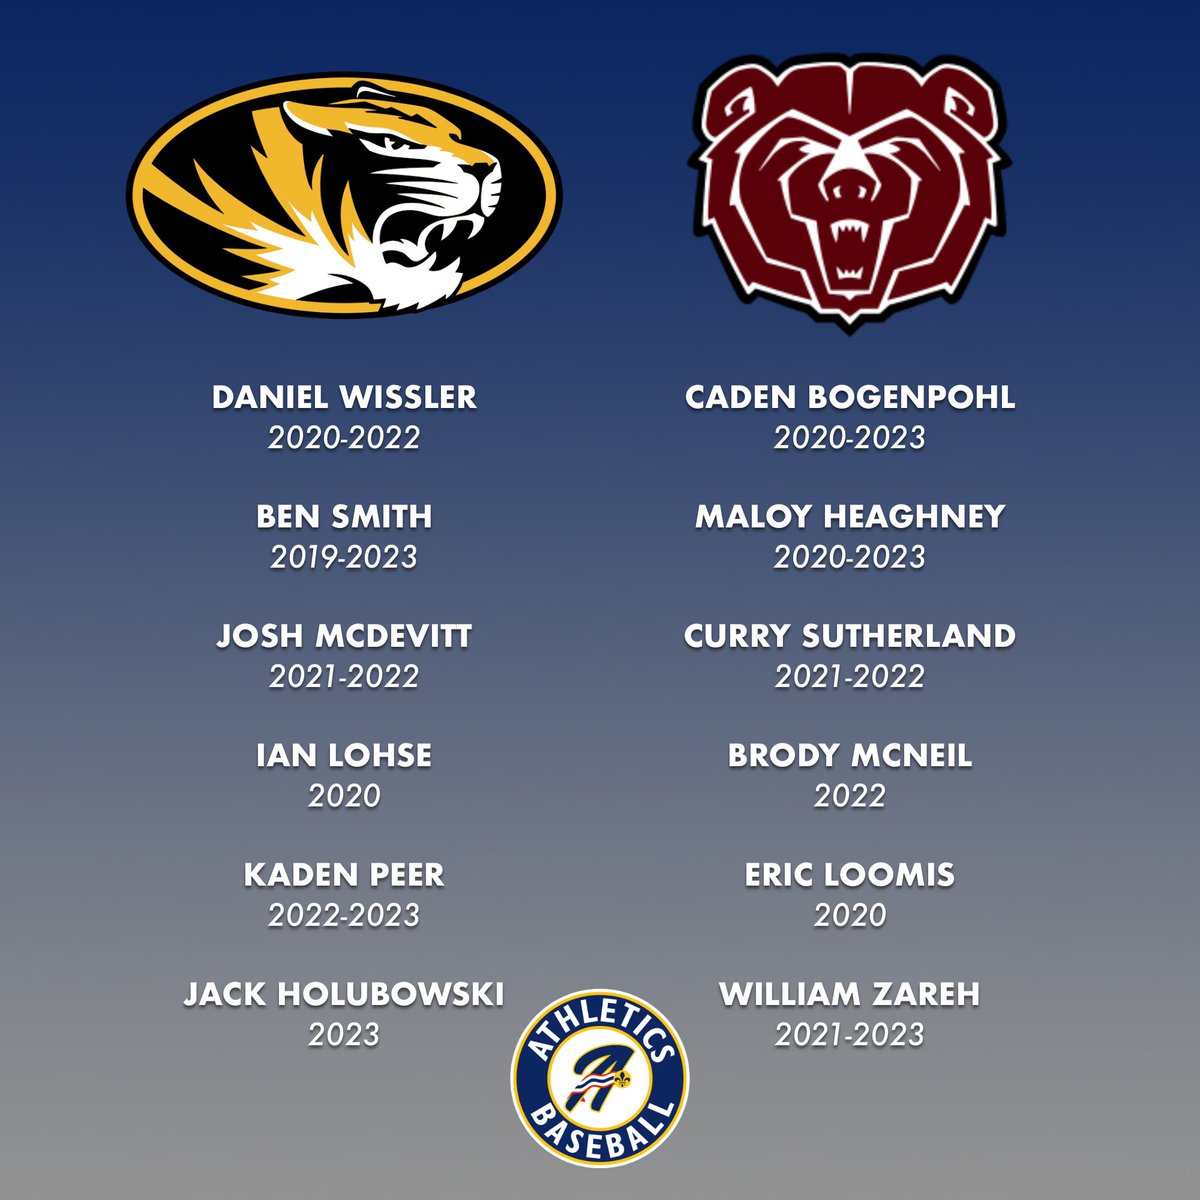 Lot of former A’s in the Mizzou - Mo State game tonight! Tune in on SEC network+